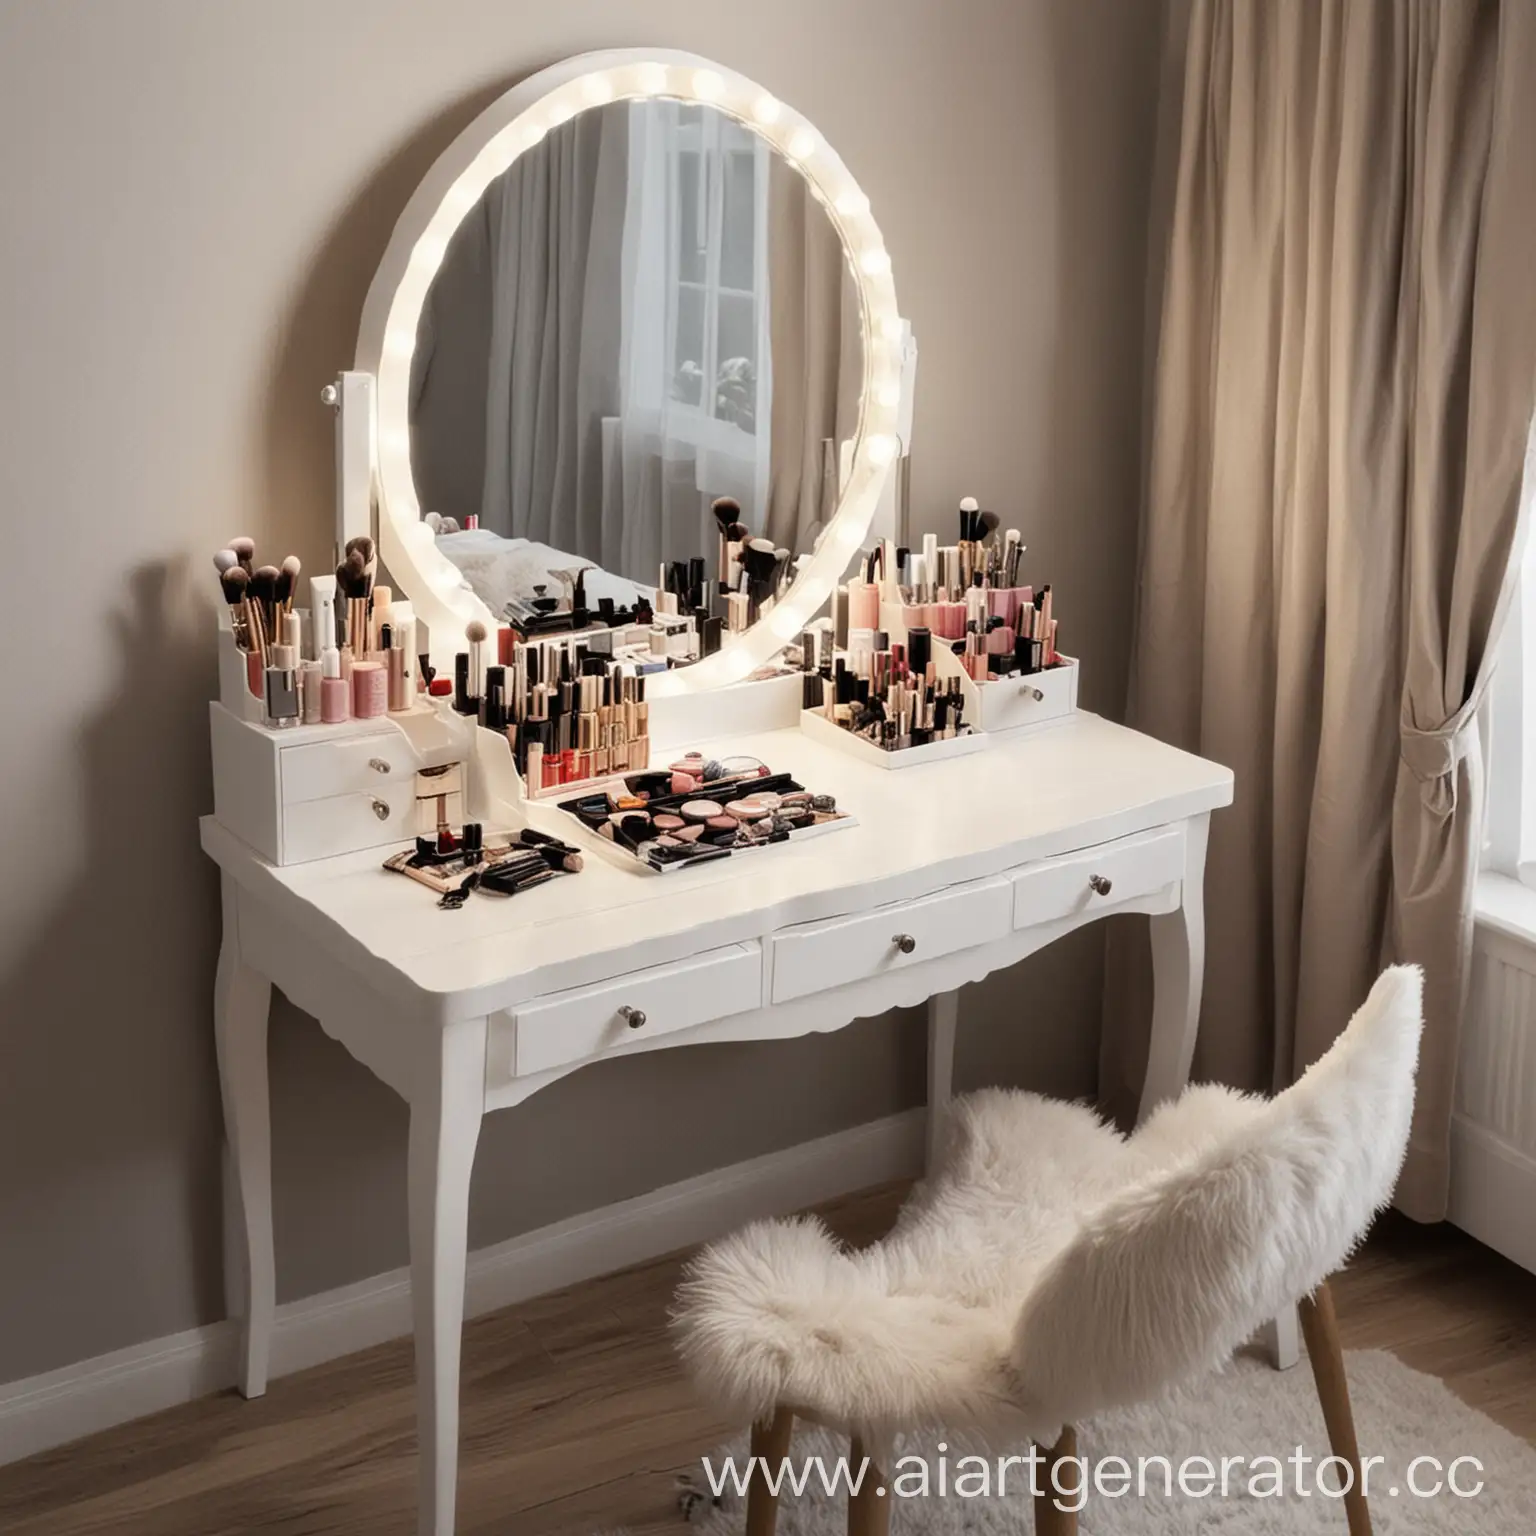 Cosmetics-Table-in-Bedroom-Organized-Beauty-Essentials-Display